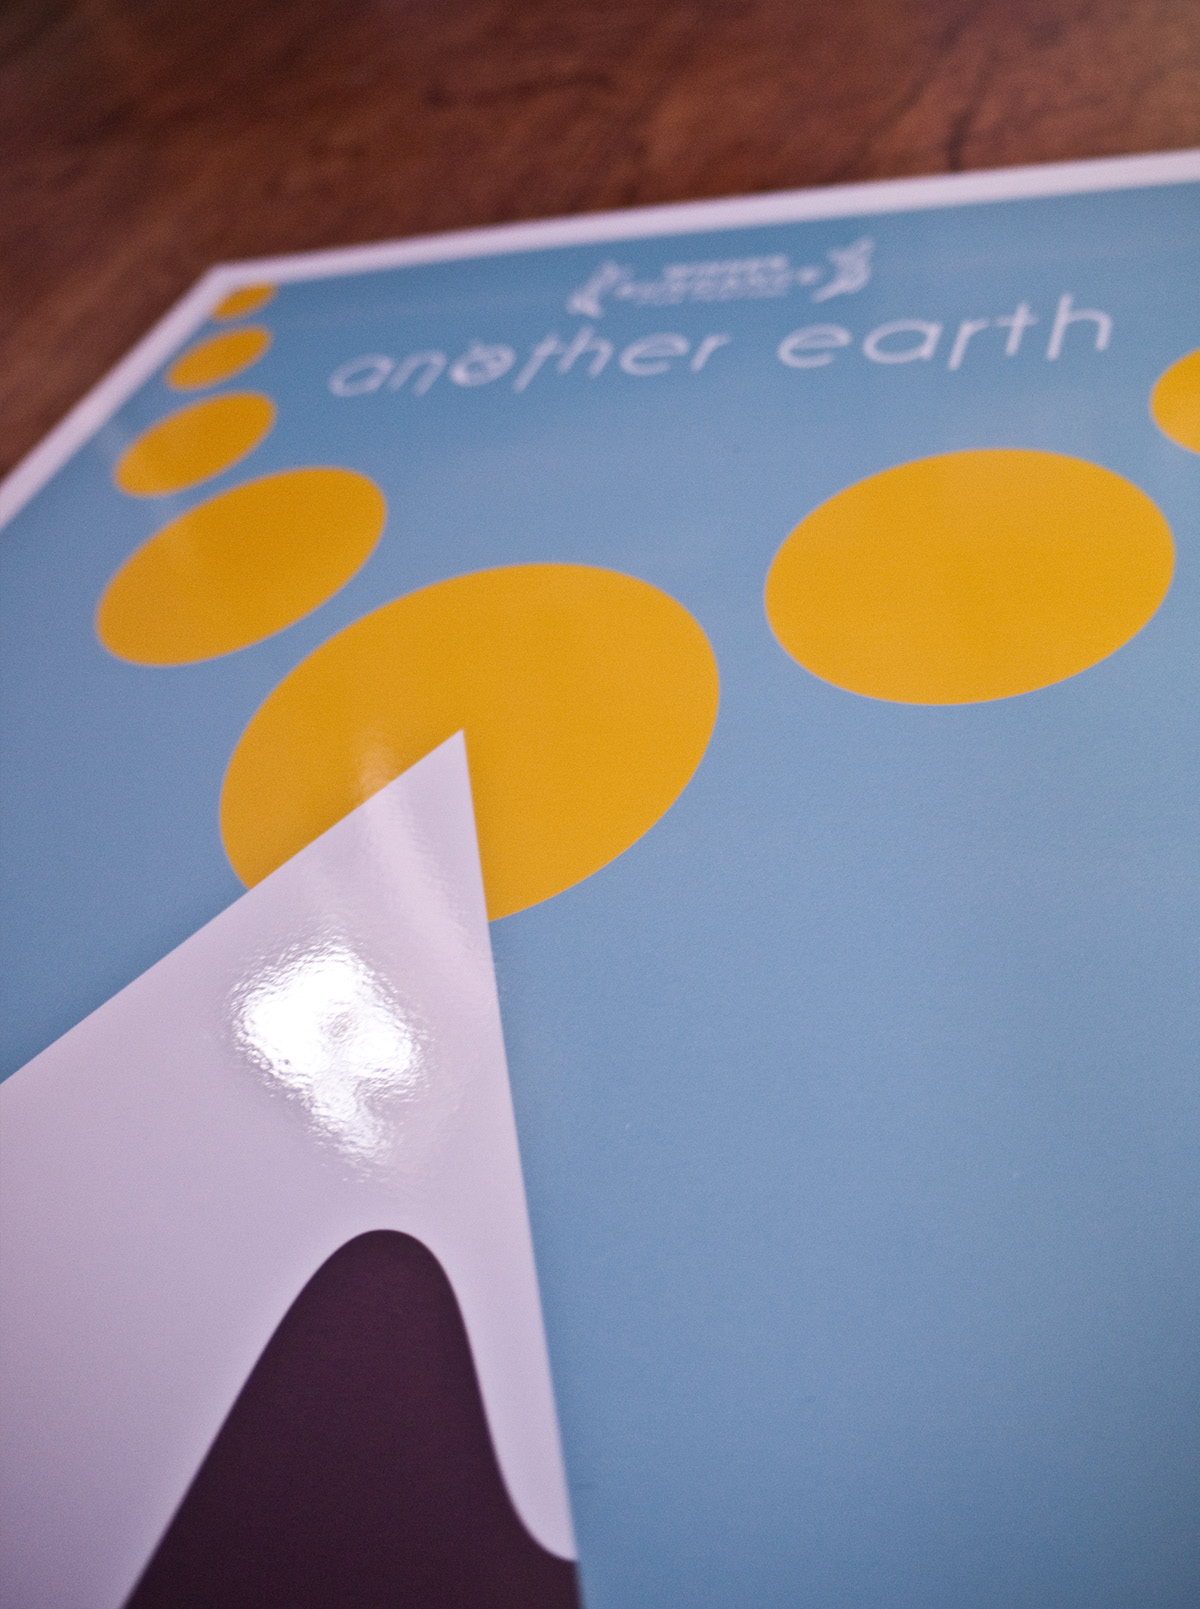 another earth film poster poster